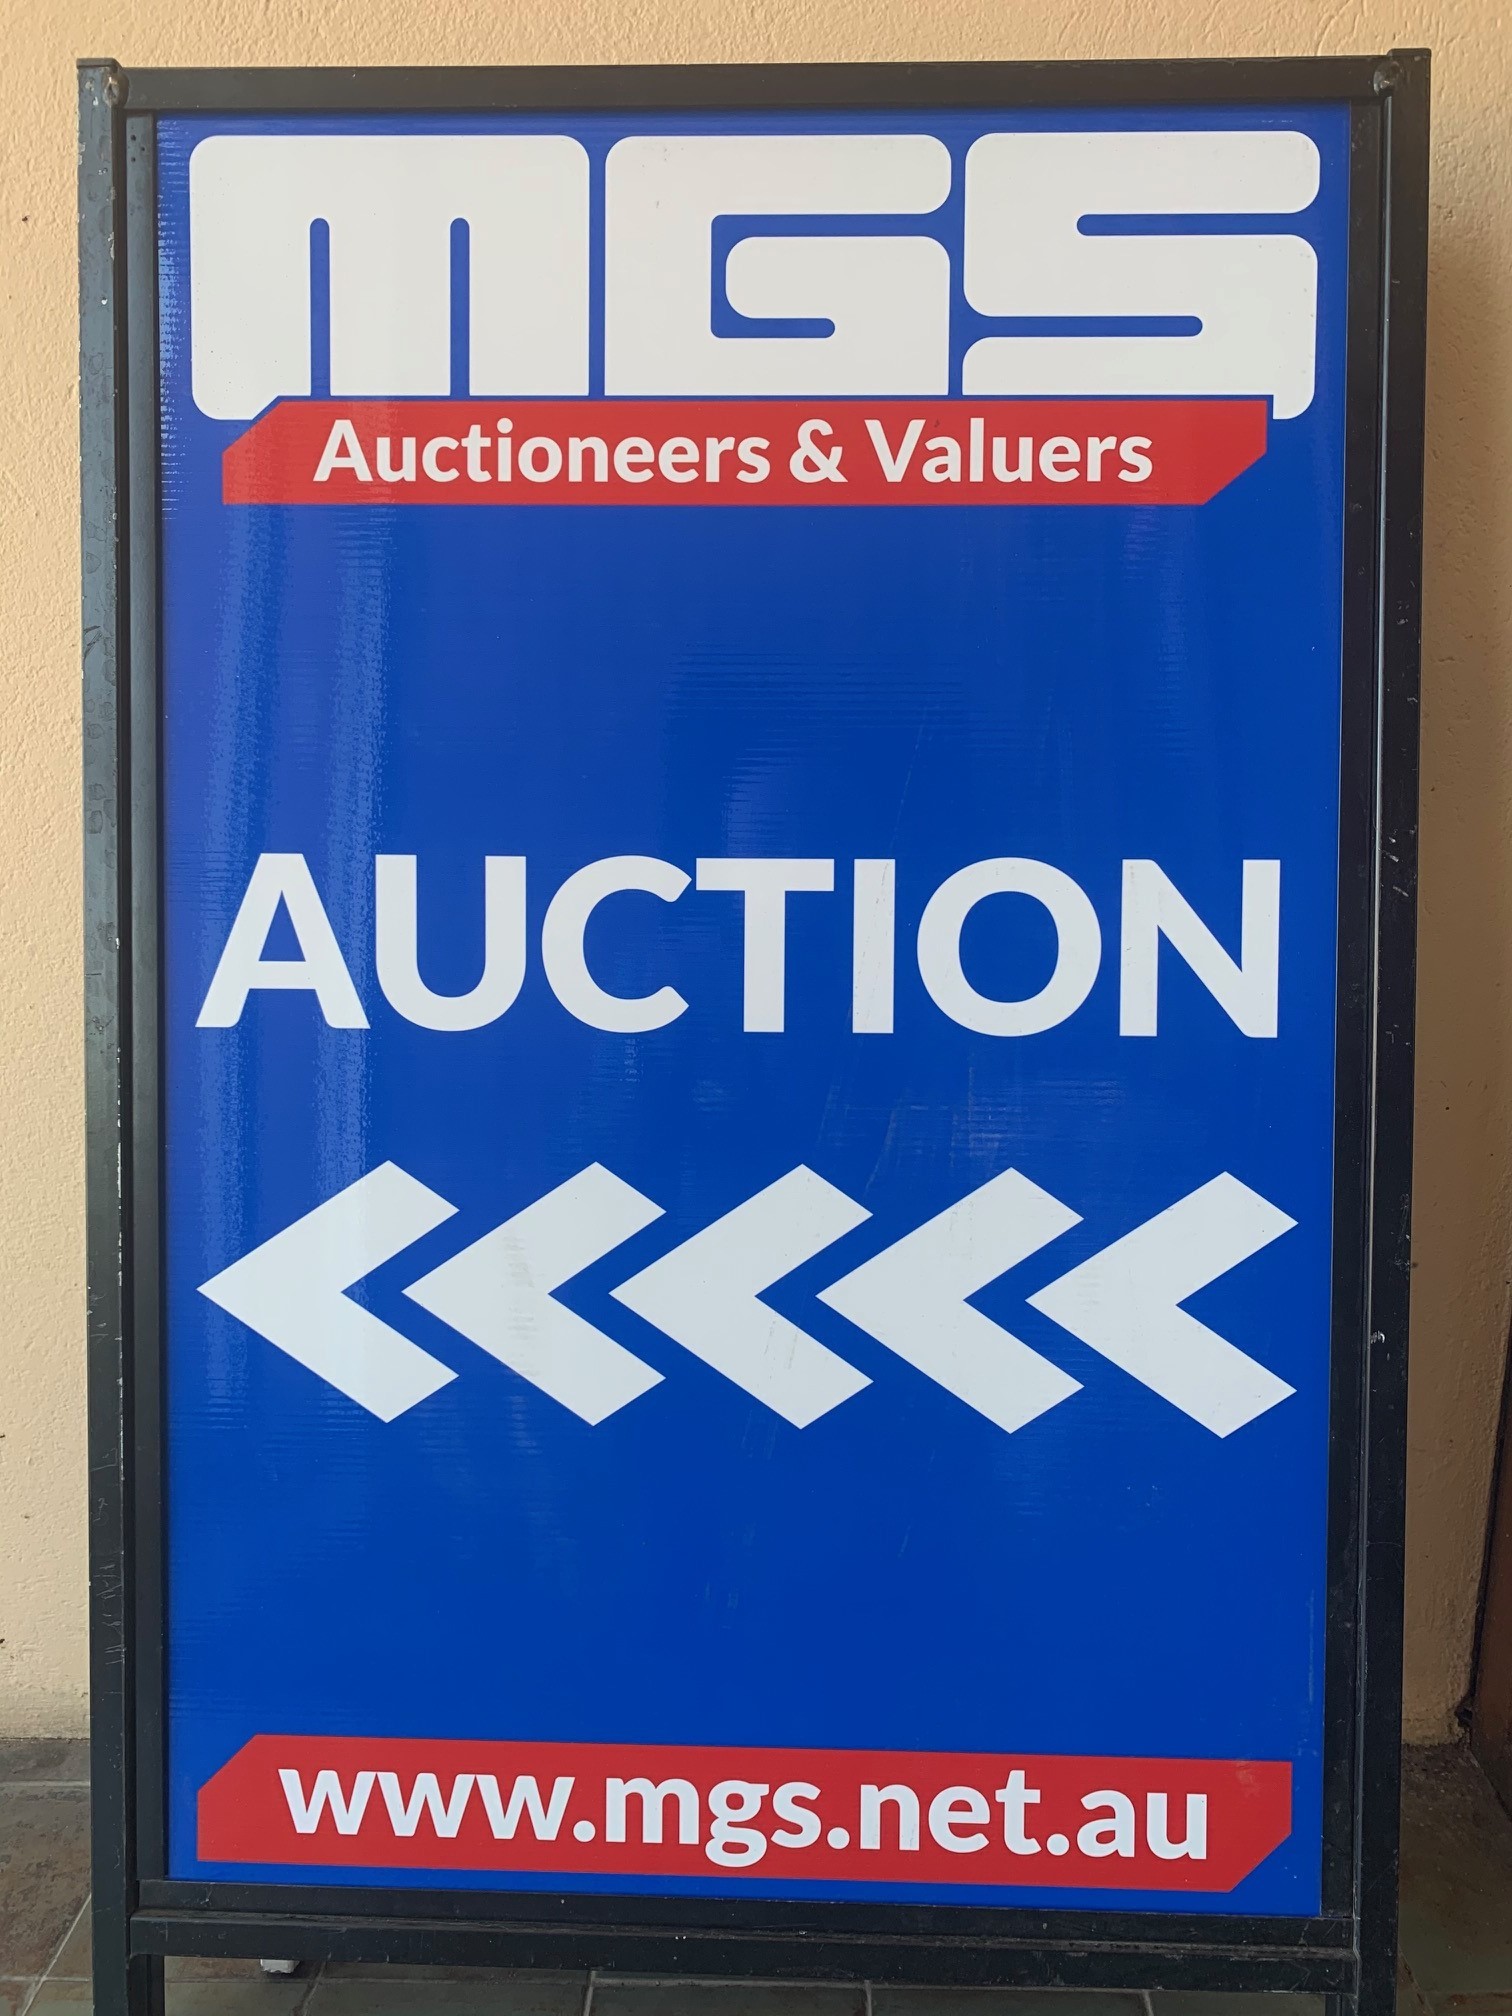 mgs auctions